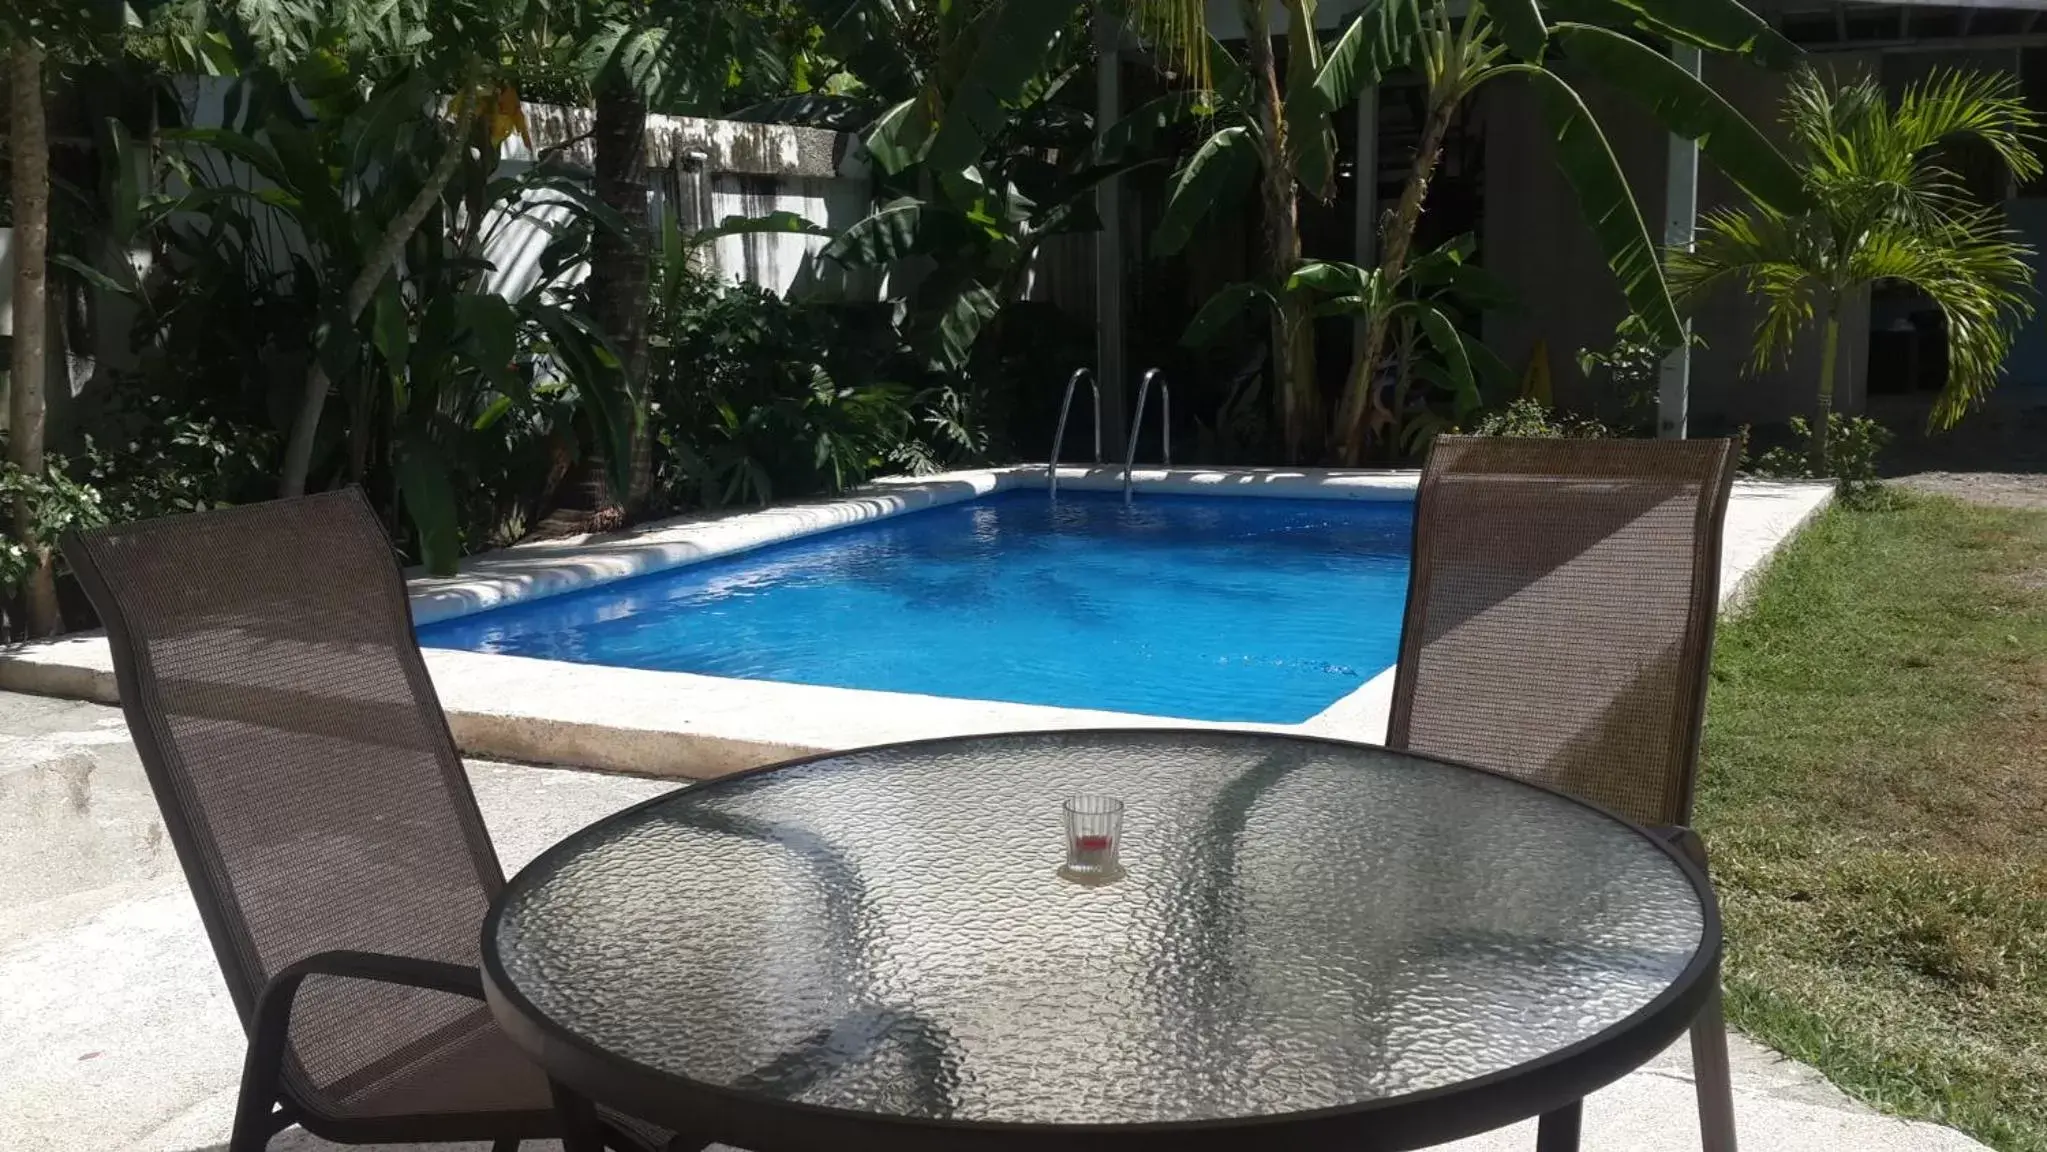 On site, Swimming Pool in Sueño Tranquilo